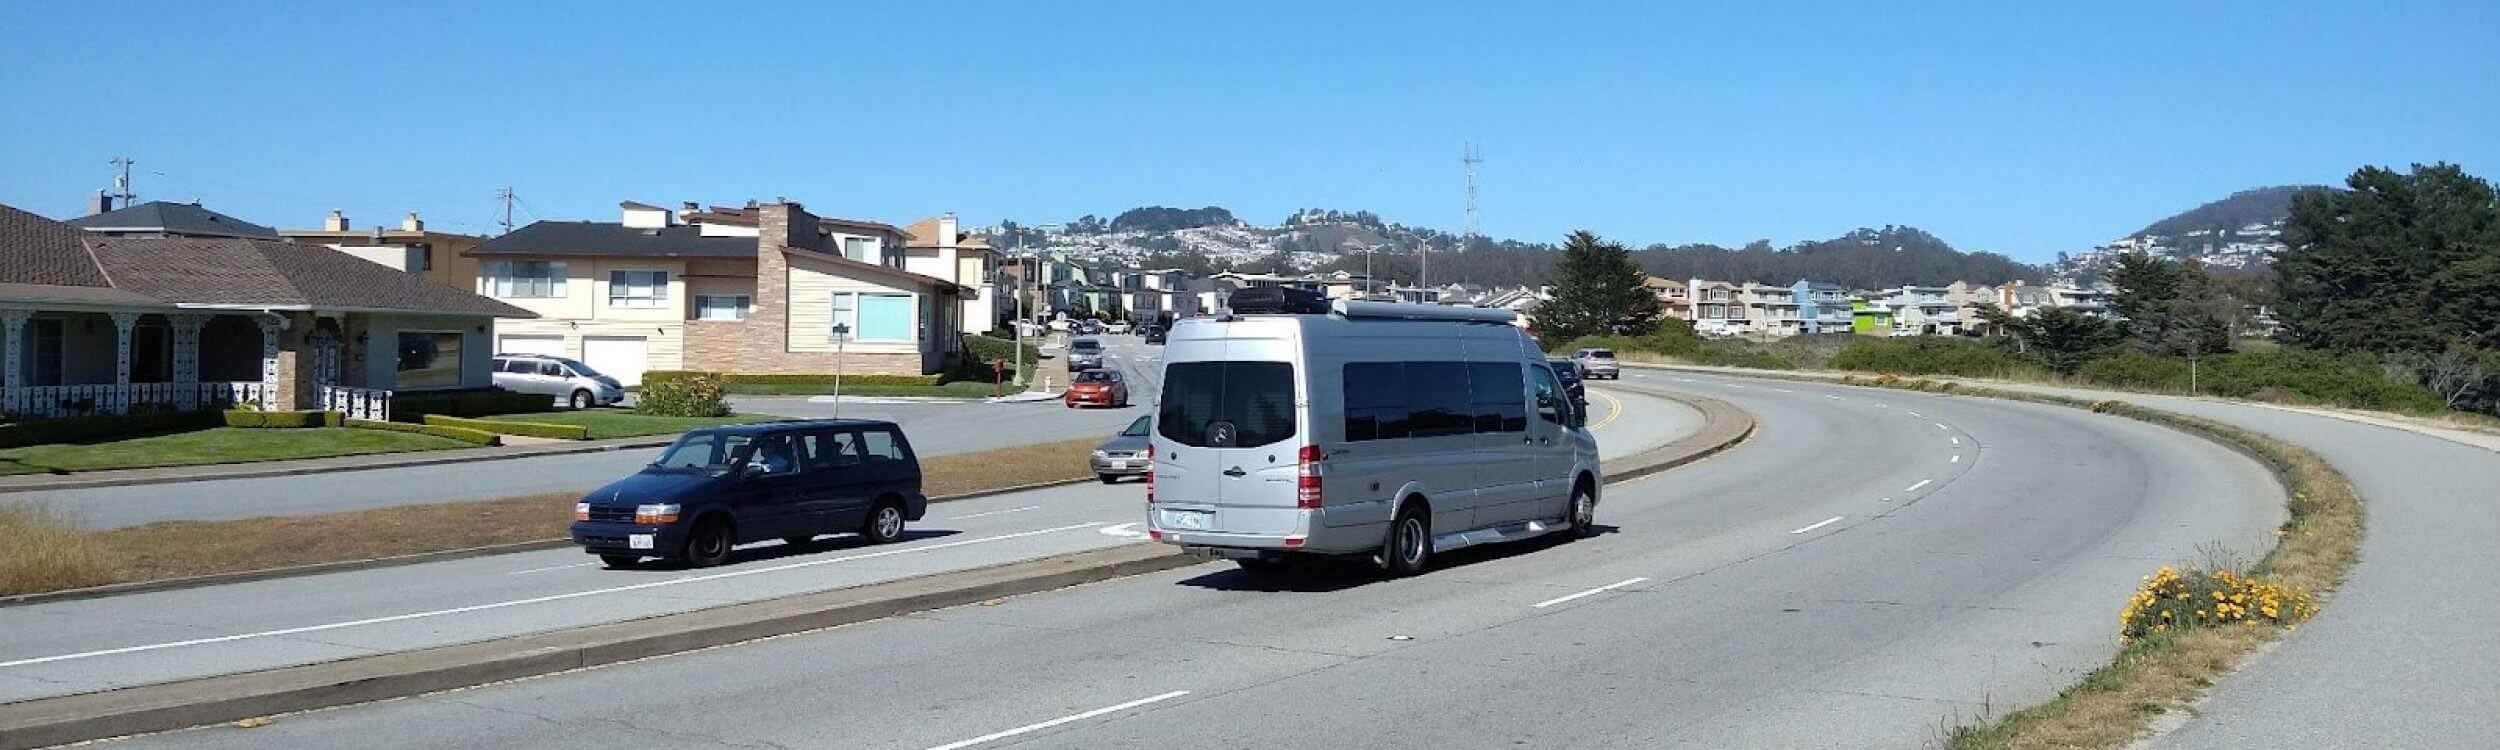 We need to win serious safety fixes on Lake Merced Boulevard – and can with your help